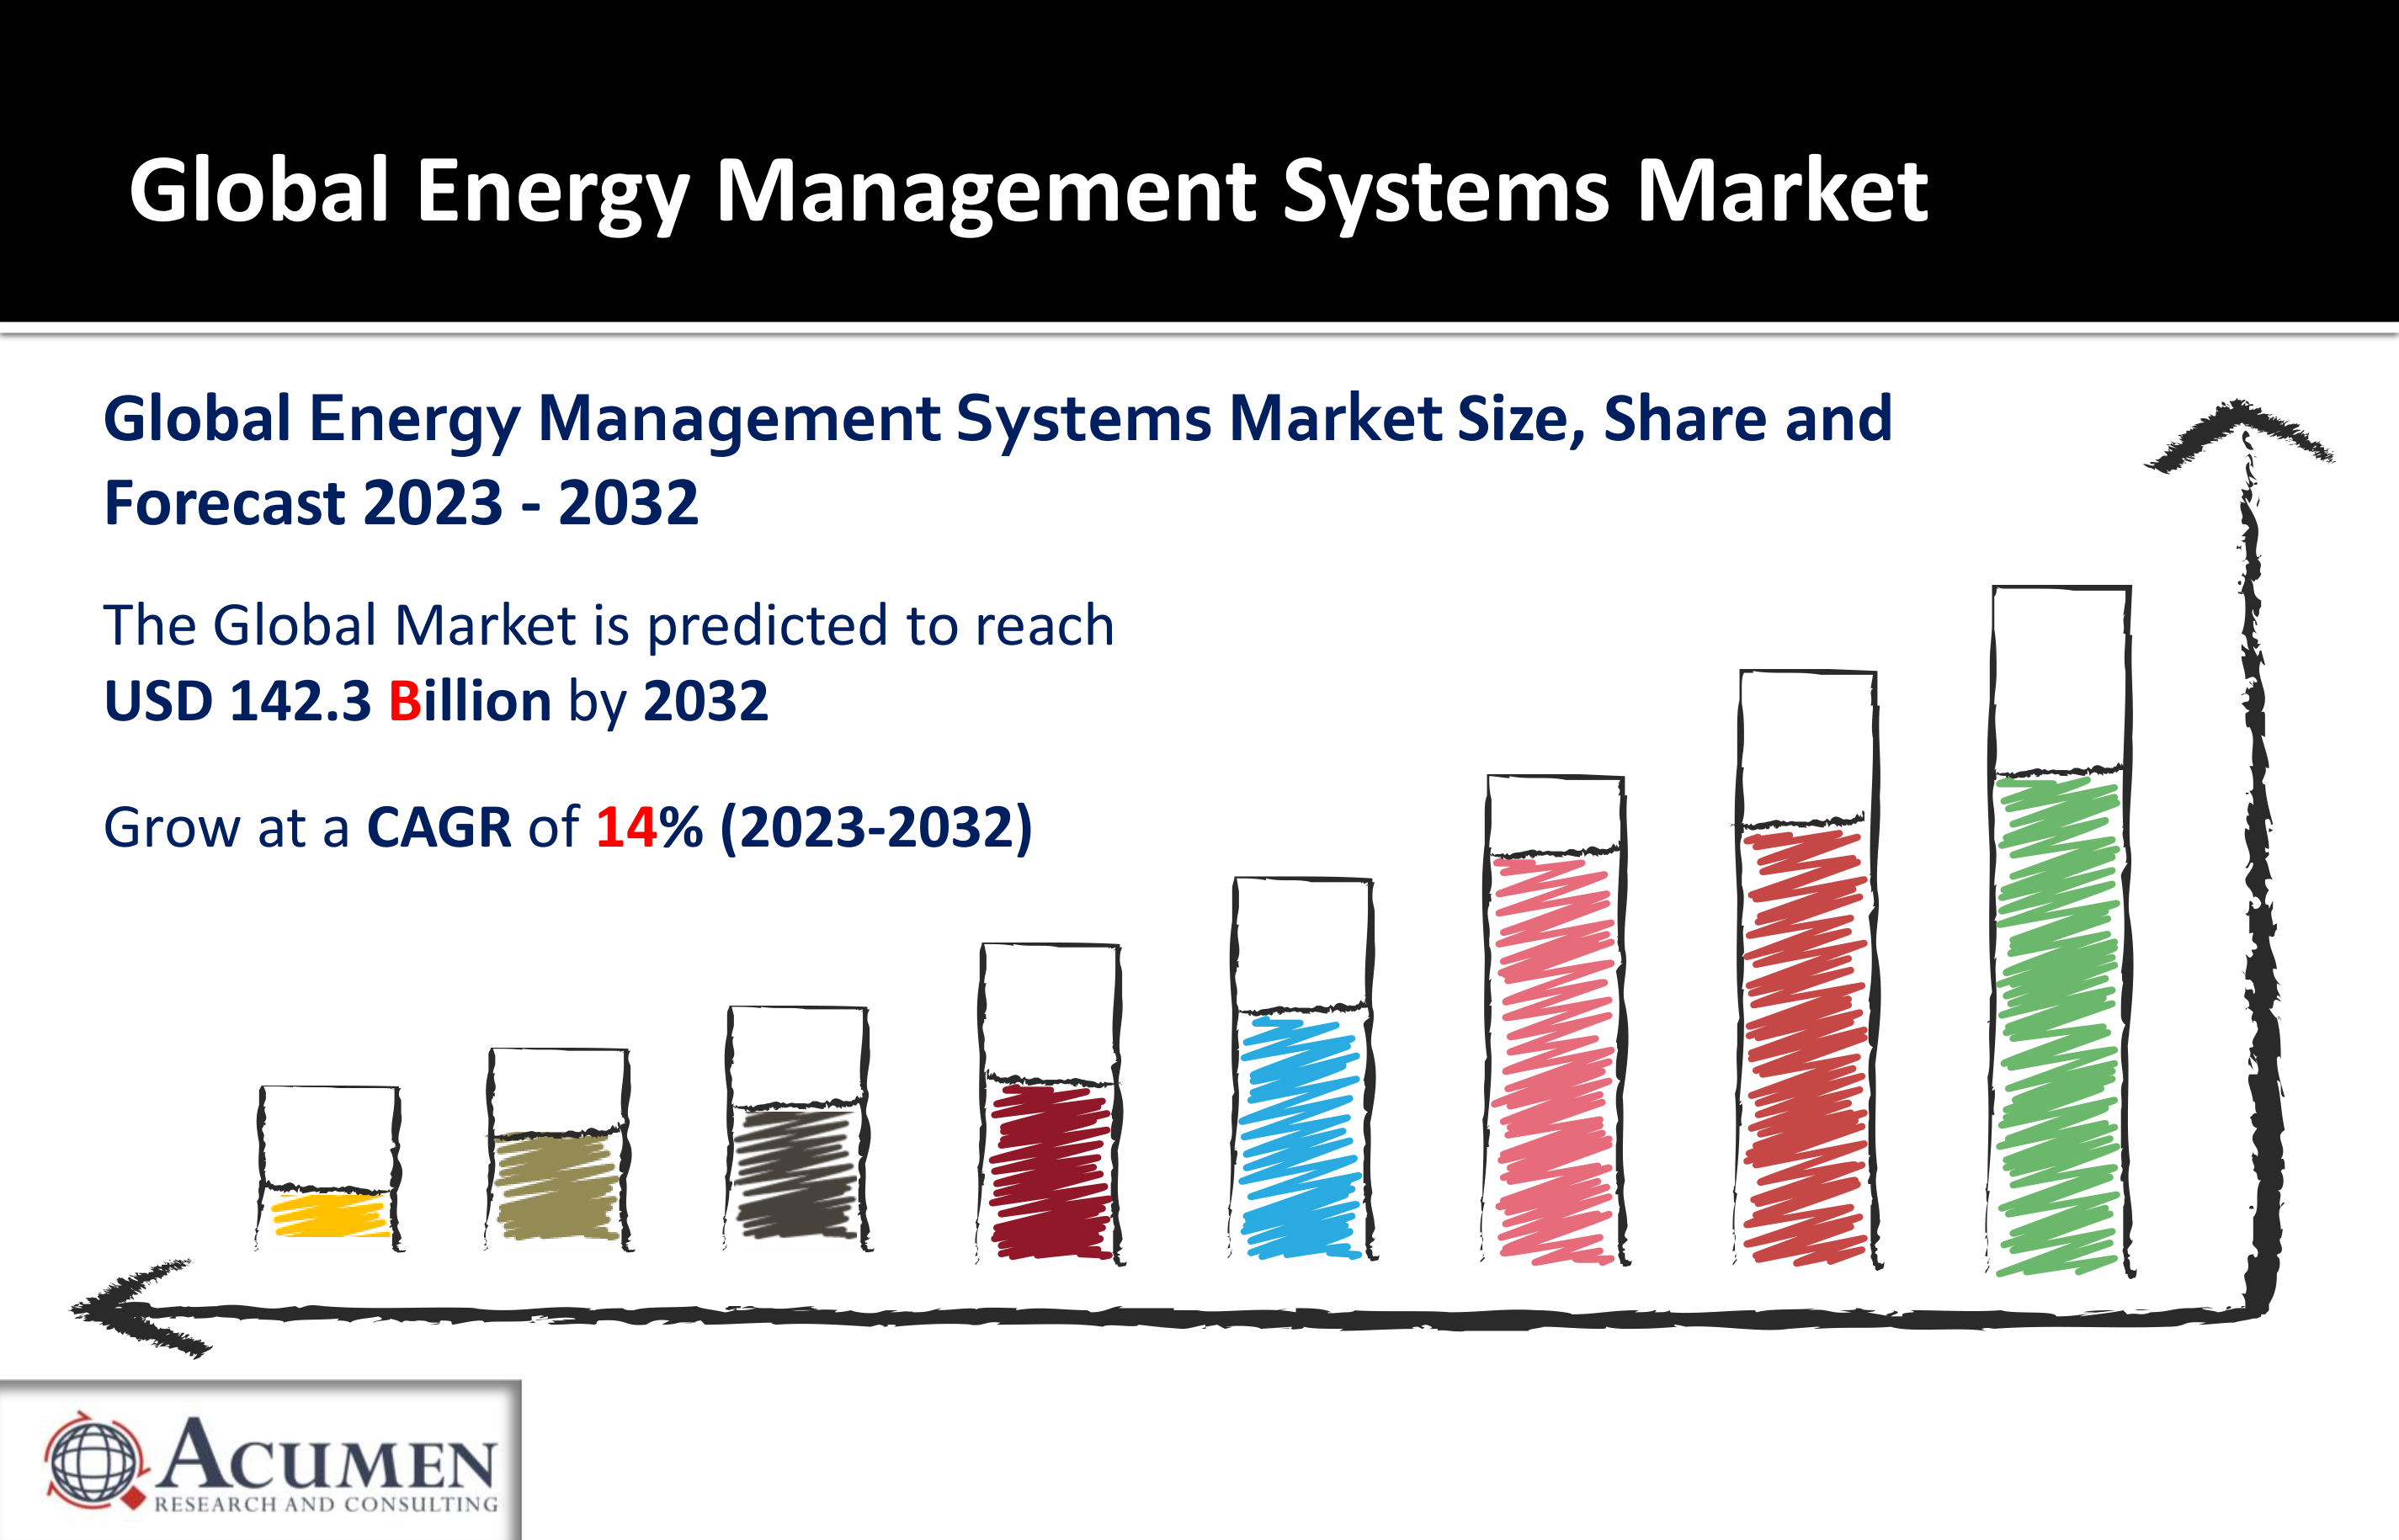 Energy Management Systems Market Was Worth USD 142.3 Billion in 2032, with a 14% CAGR